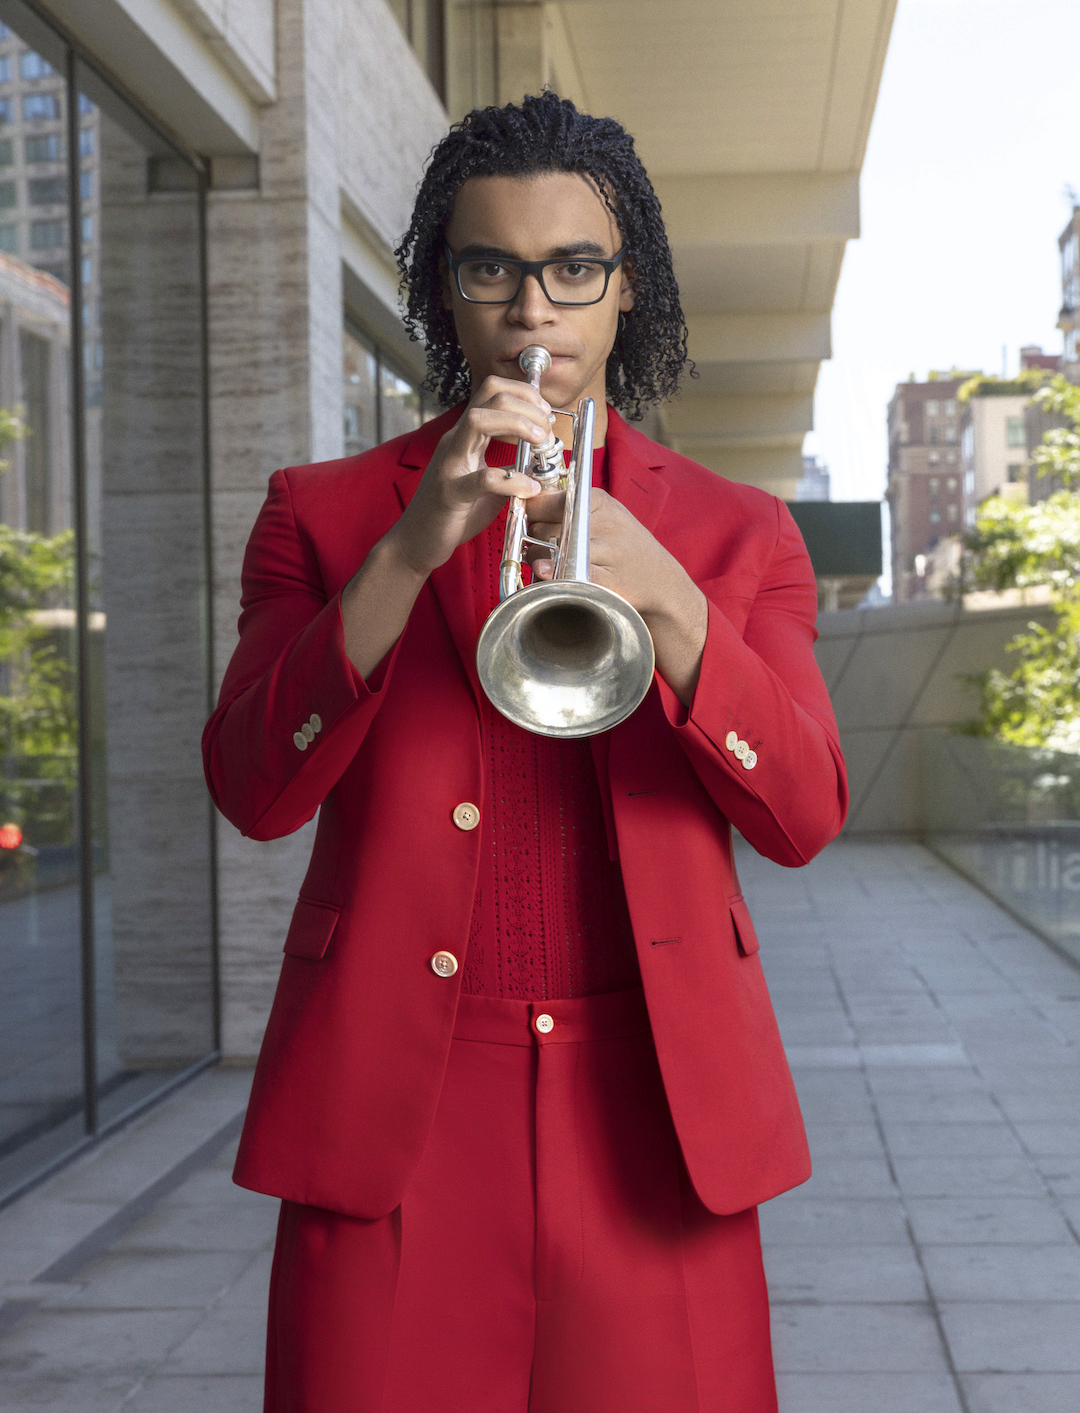 A trumpet player wearing a fire engine red Bermuda shorts suit posing outside with his horn